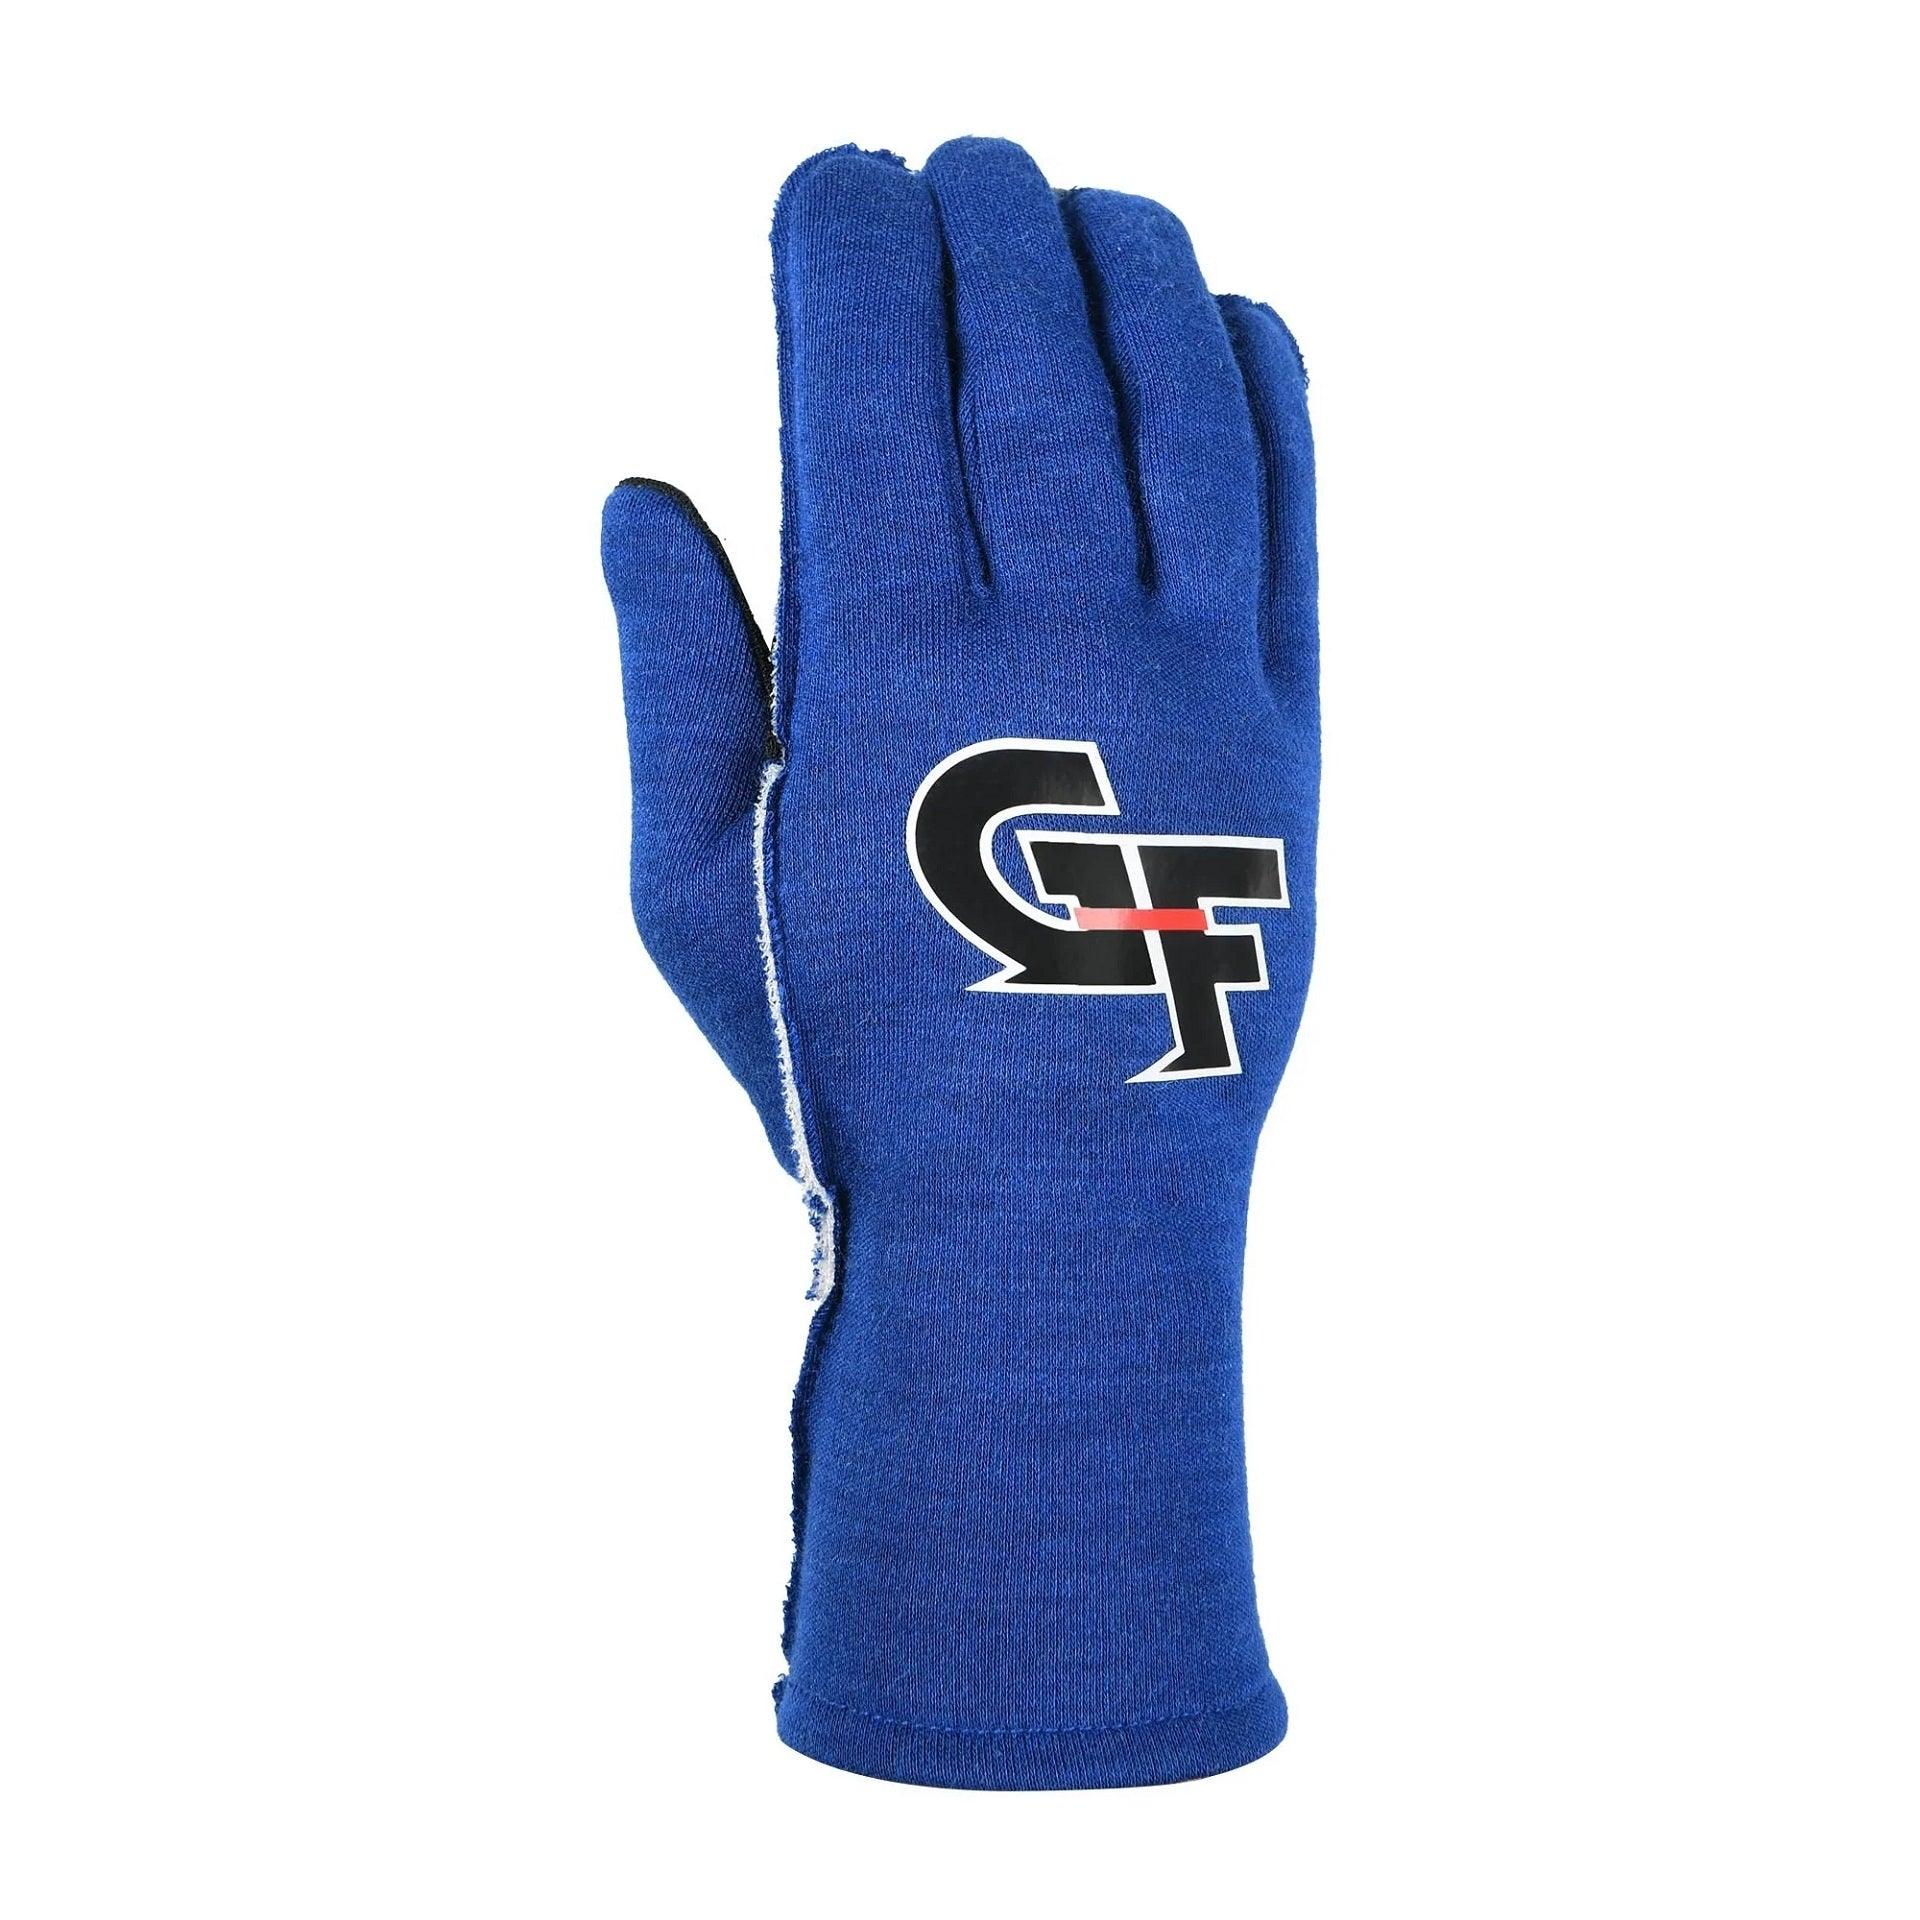 Gloves G-Limit XX-Small Blue - Burlile Performance Products